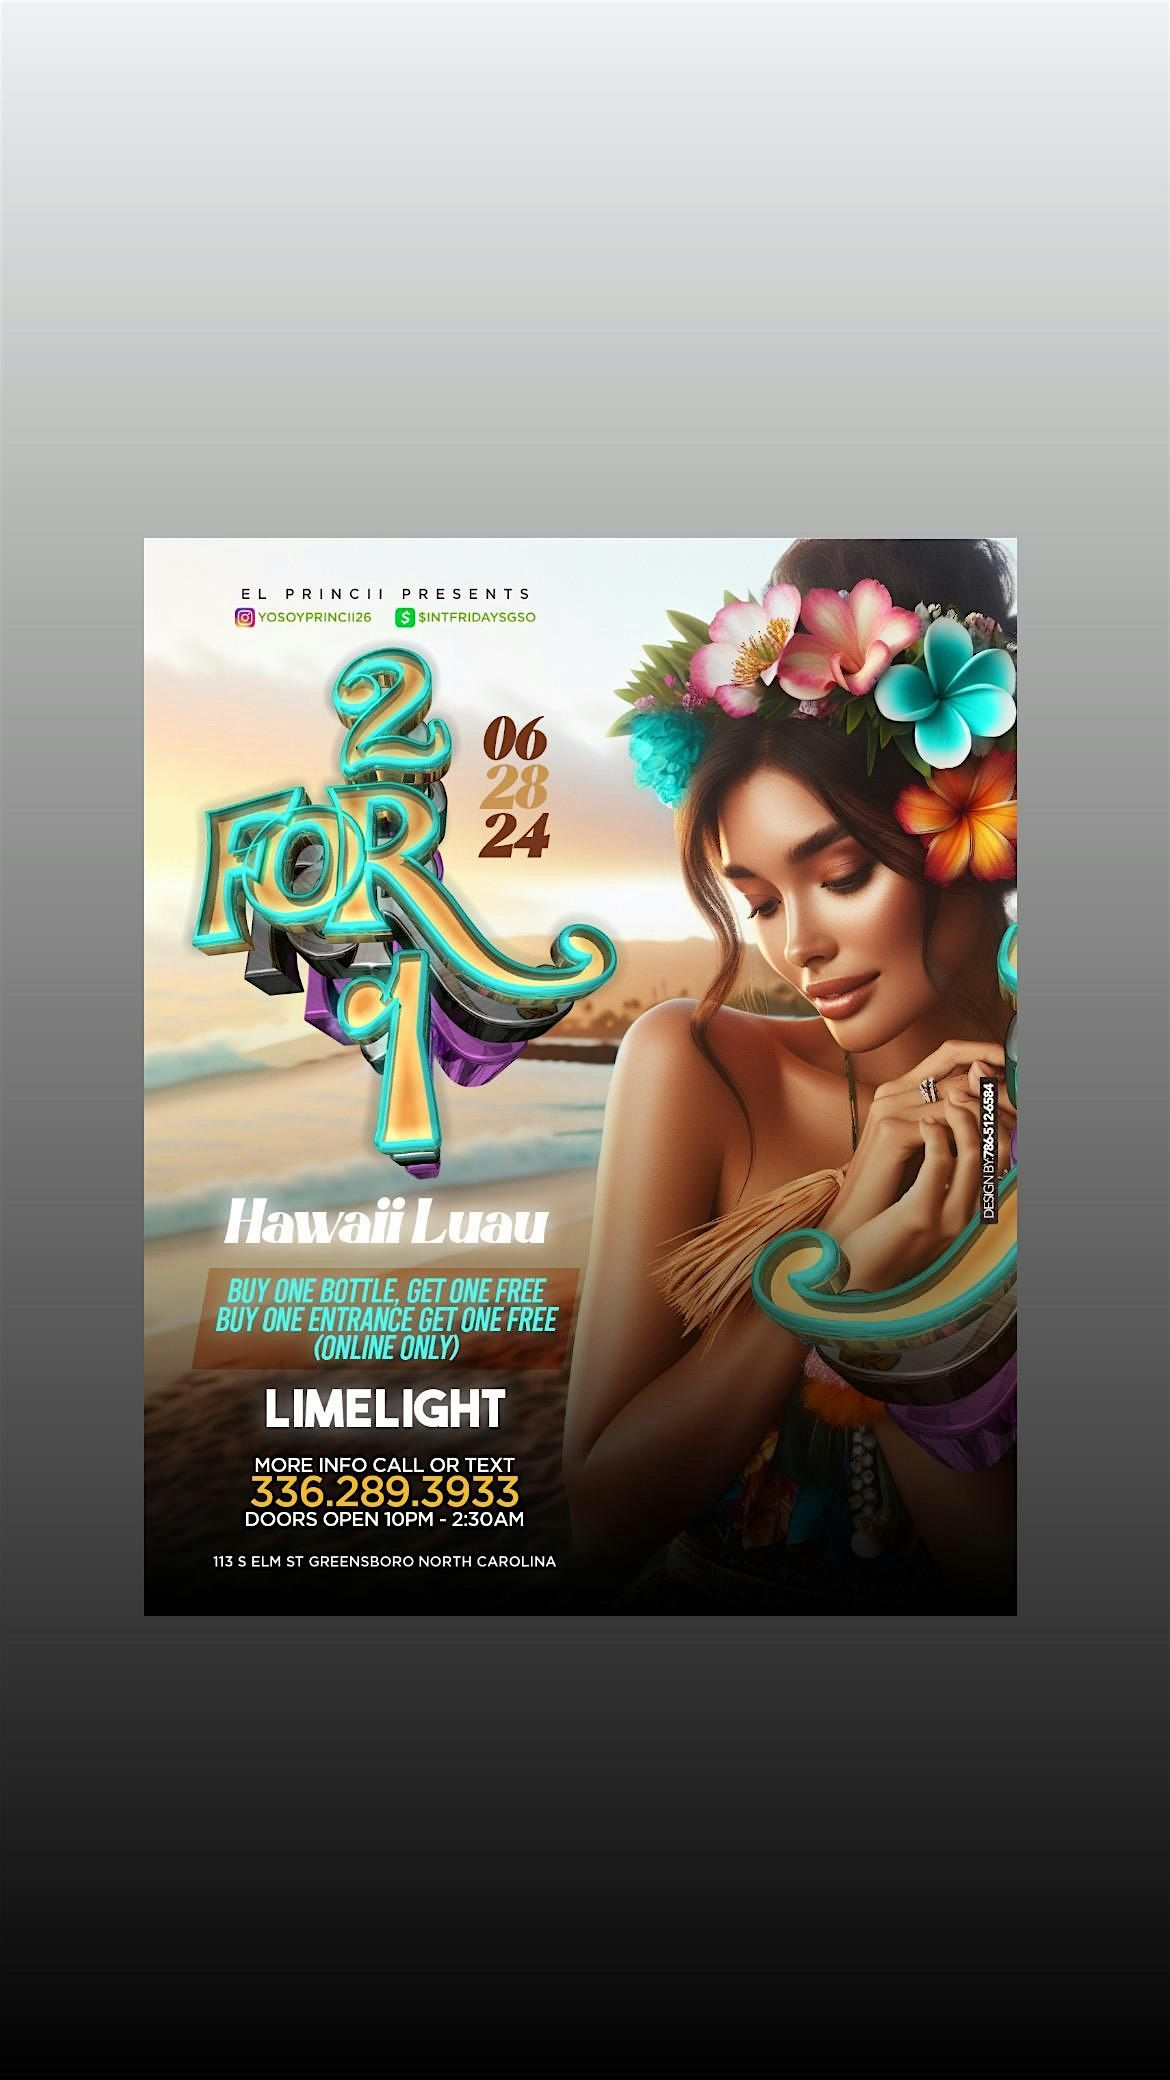 HAWAII LUAU PARTY \u201c2FOR1 EDITION\u201d-LIMELIGHT-FRIDAY-JUNE\/28TH